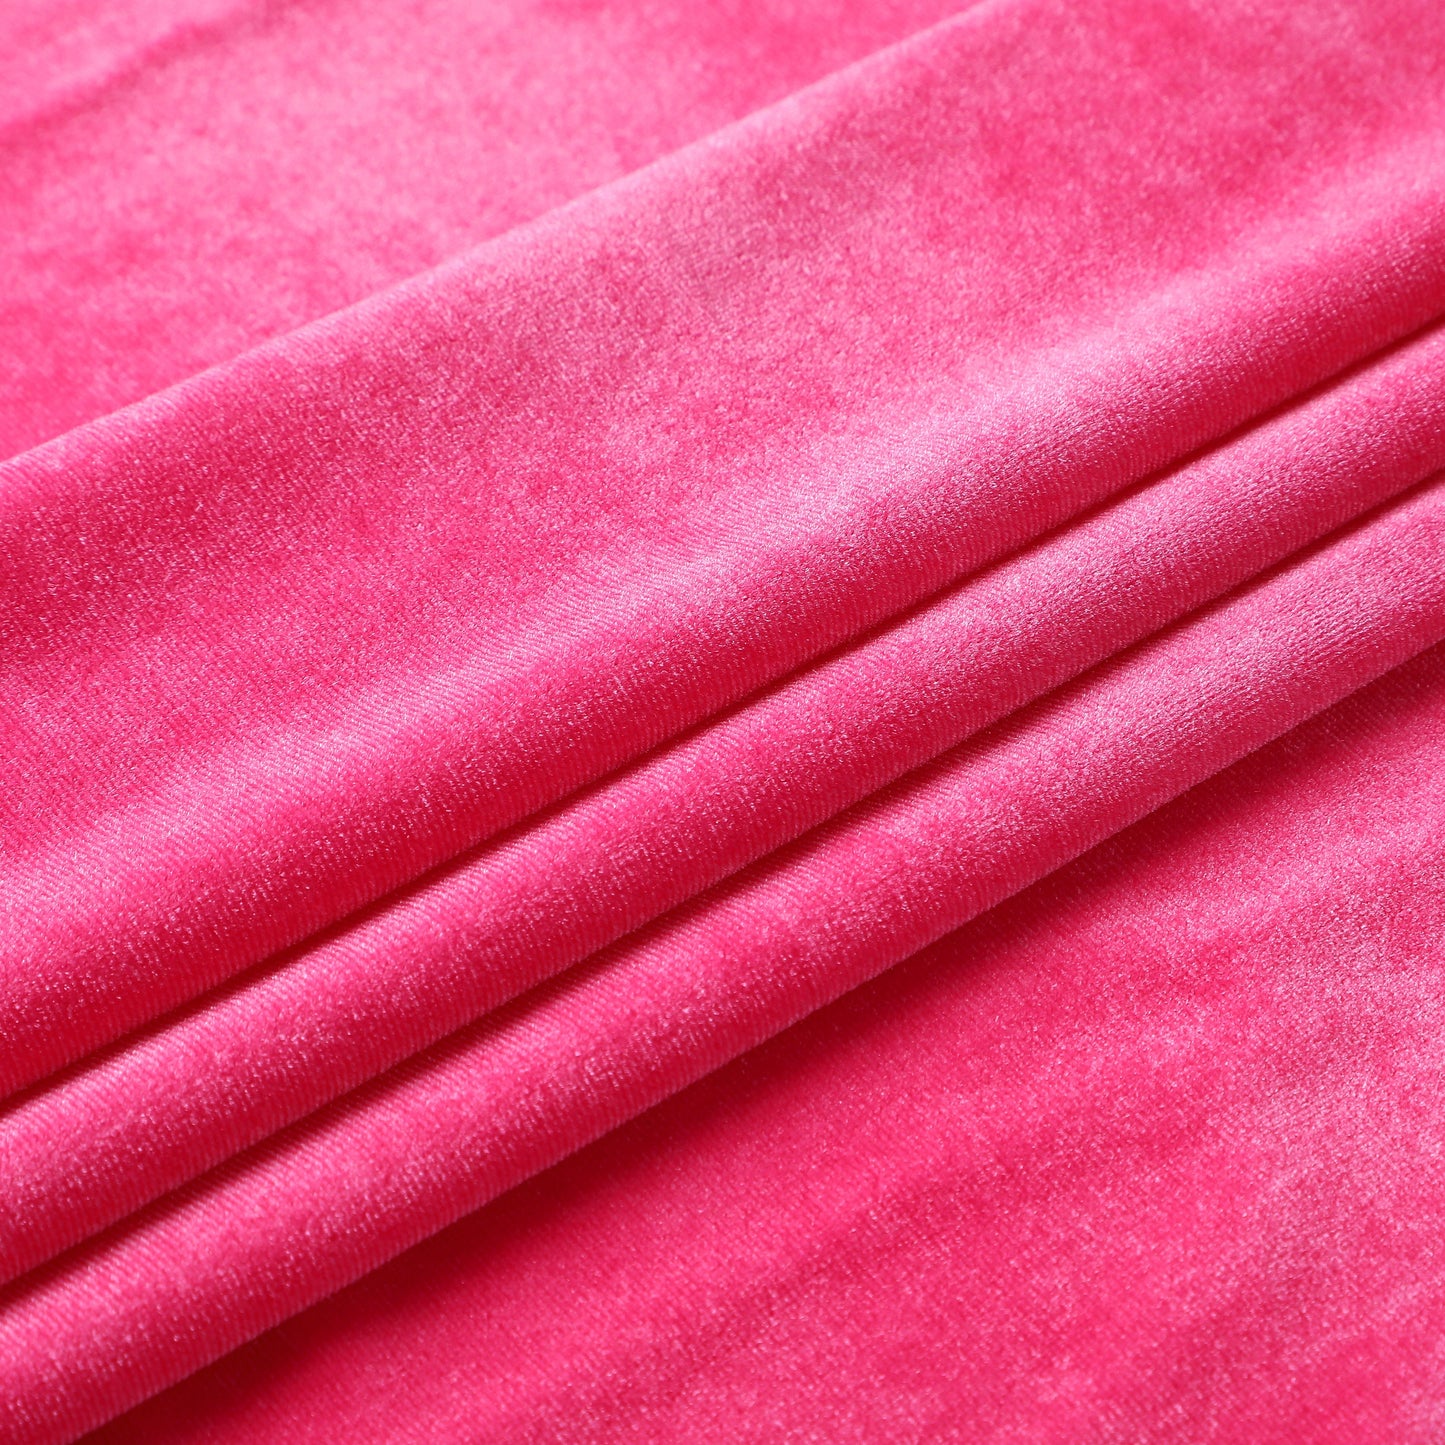 Raspberry Stretchy Velvet Fabric by The Yard Stretch Fabrics Polyester Spandex for Scrunchies Clothes Costumes Crafts Bows